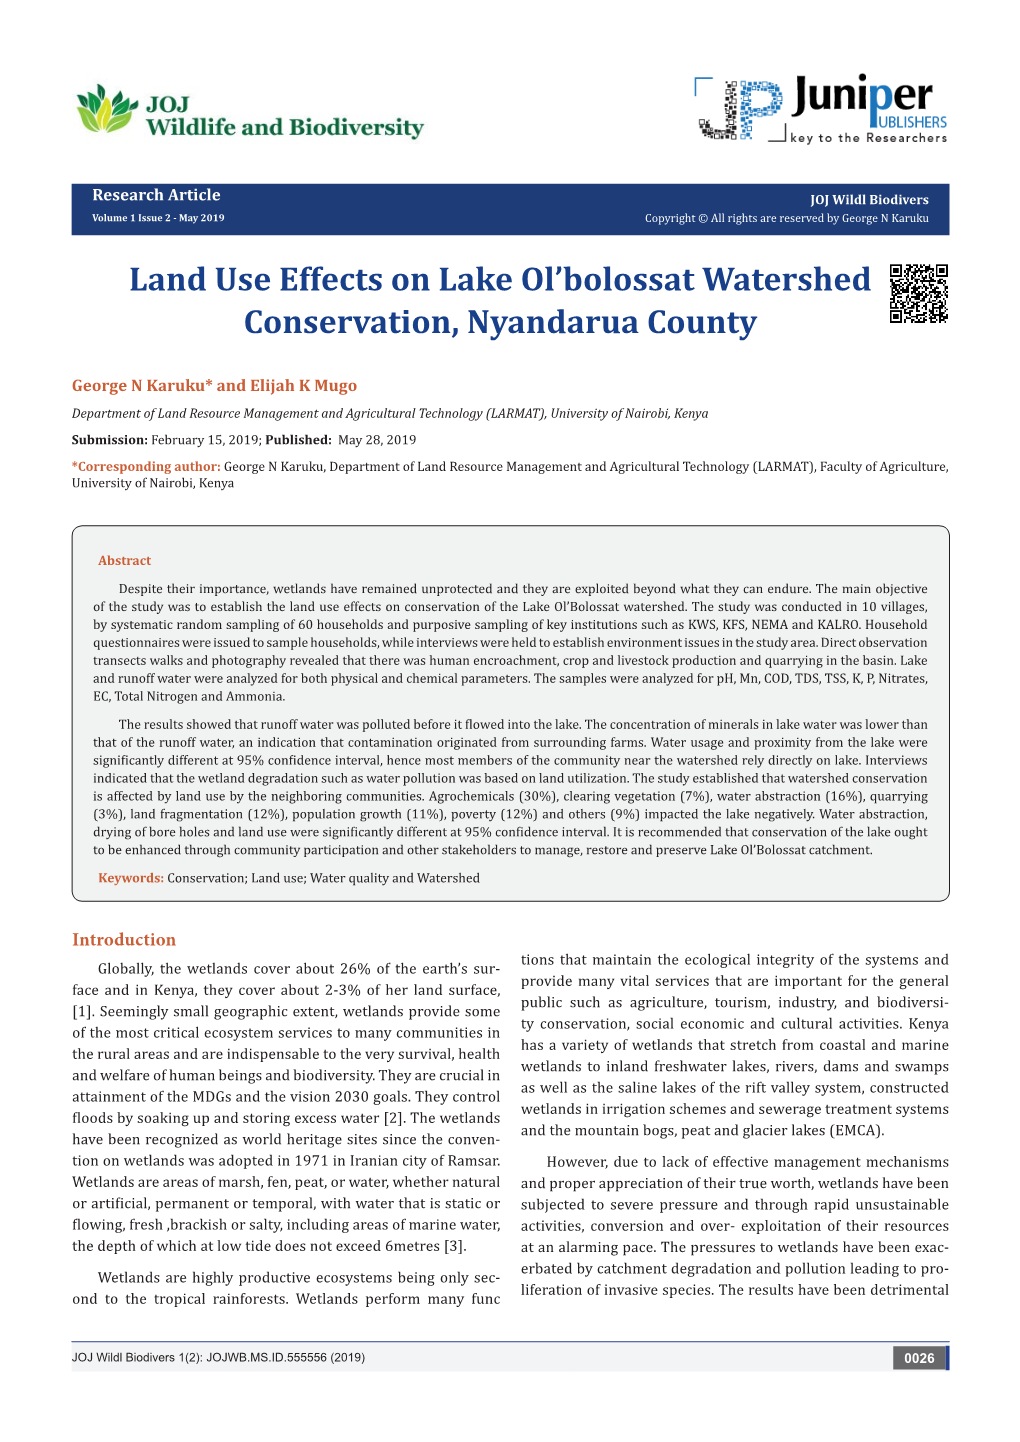 Land Use Effects on Lake Ol'bolossat Watershed Conservation